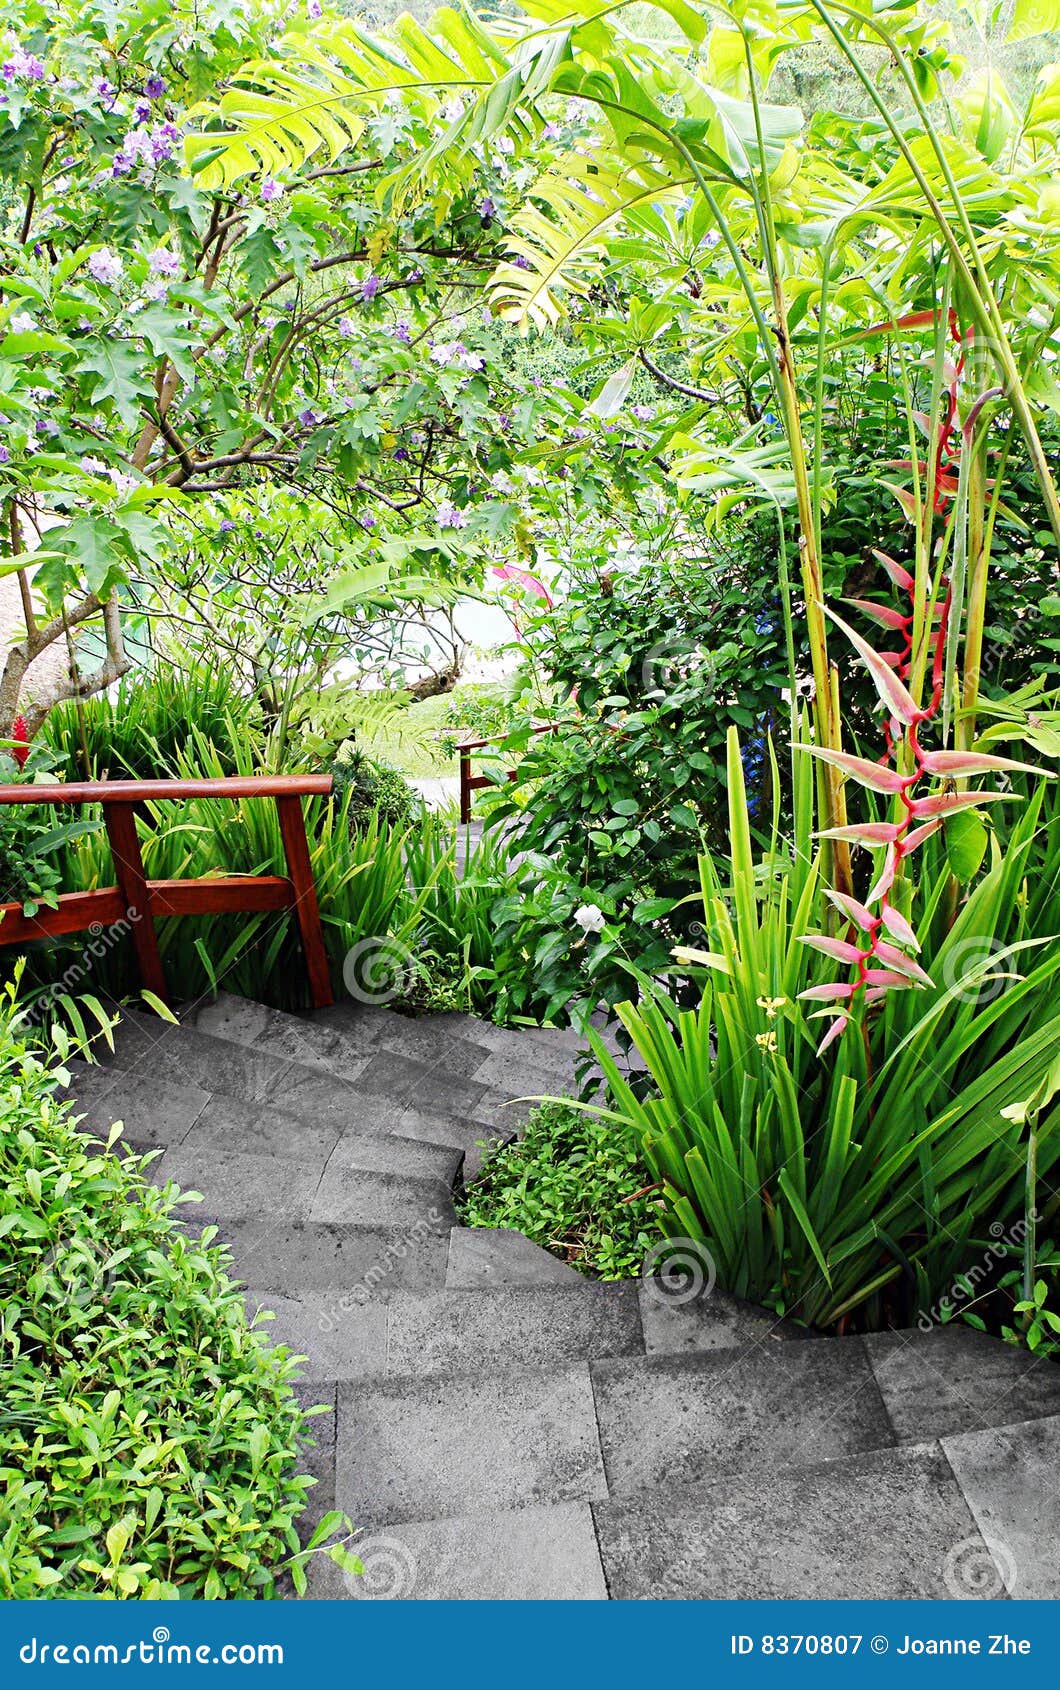 Landscaping Of Tropical Gardens Royalty Free Stock ...